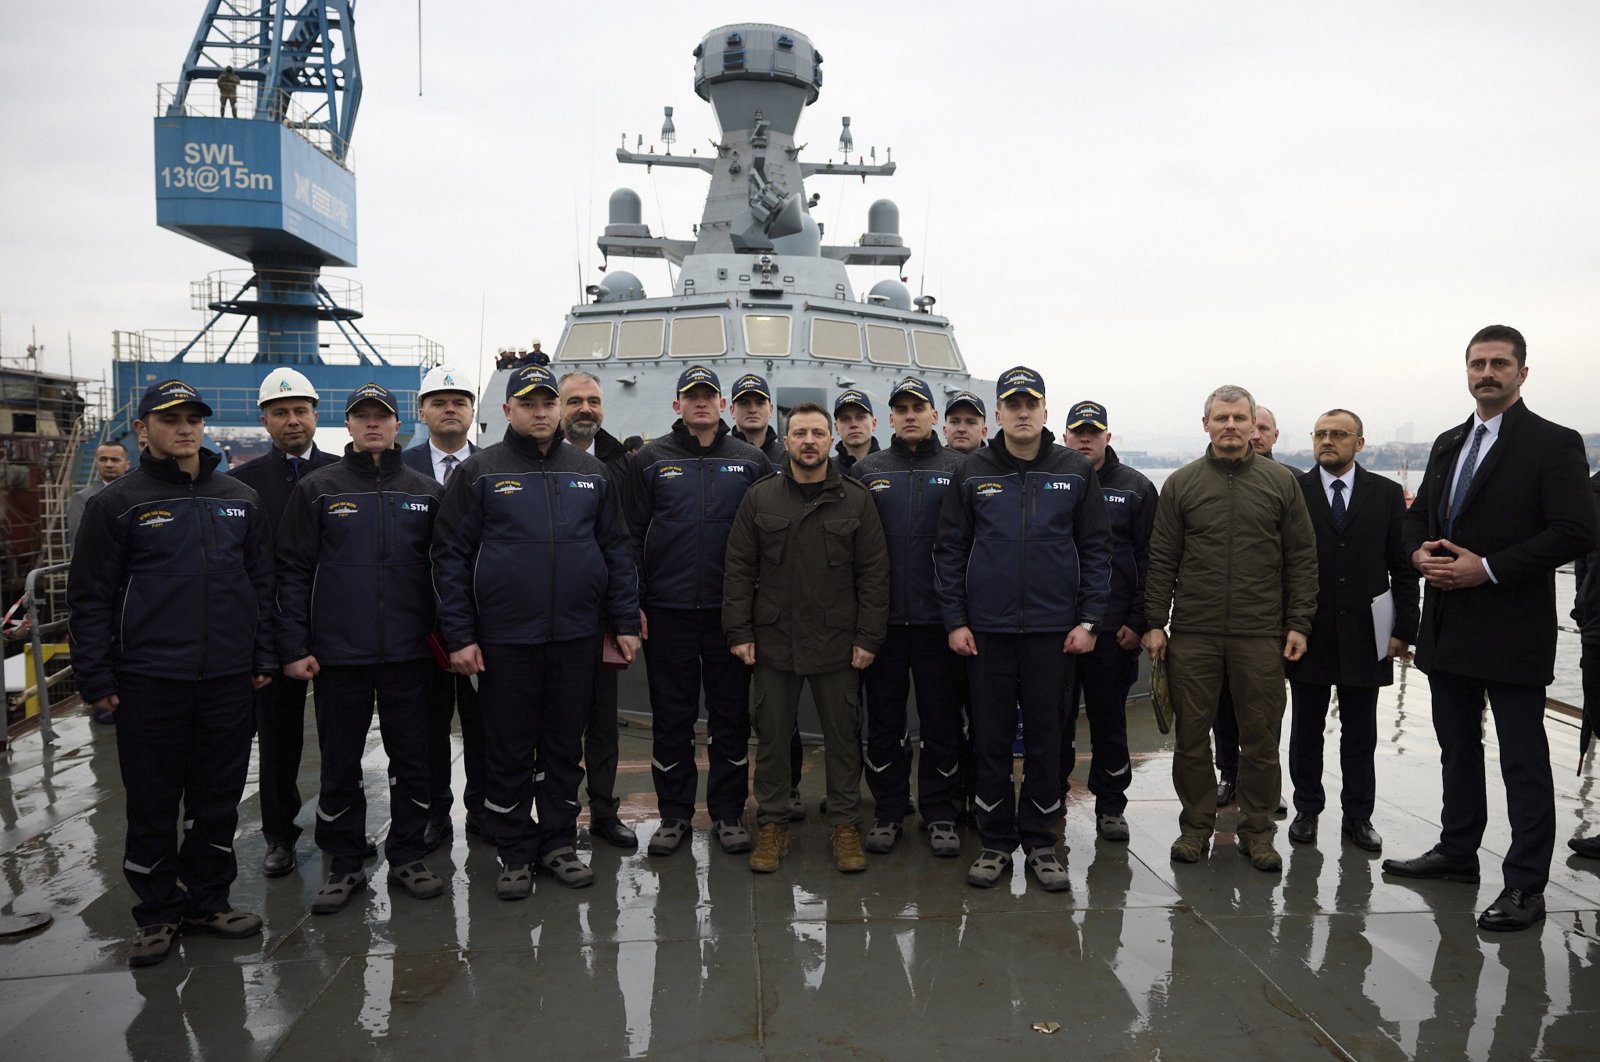 Ukrainian President Volodymyr Zelenskyy visits a shipyard in Istanbul, where he poses with Ukrainian Navy personnel undergoing training on the operation and maintenance of the Ivan Mazepa Corvette being built for the Ukrainian Naval Force, Istanbul, March 8, 2024. (Ukrainian Presidential Press Service Handout via AFP)